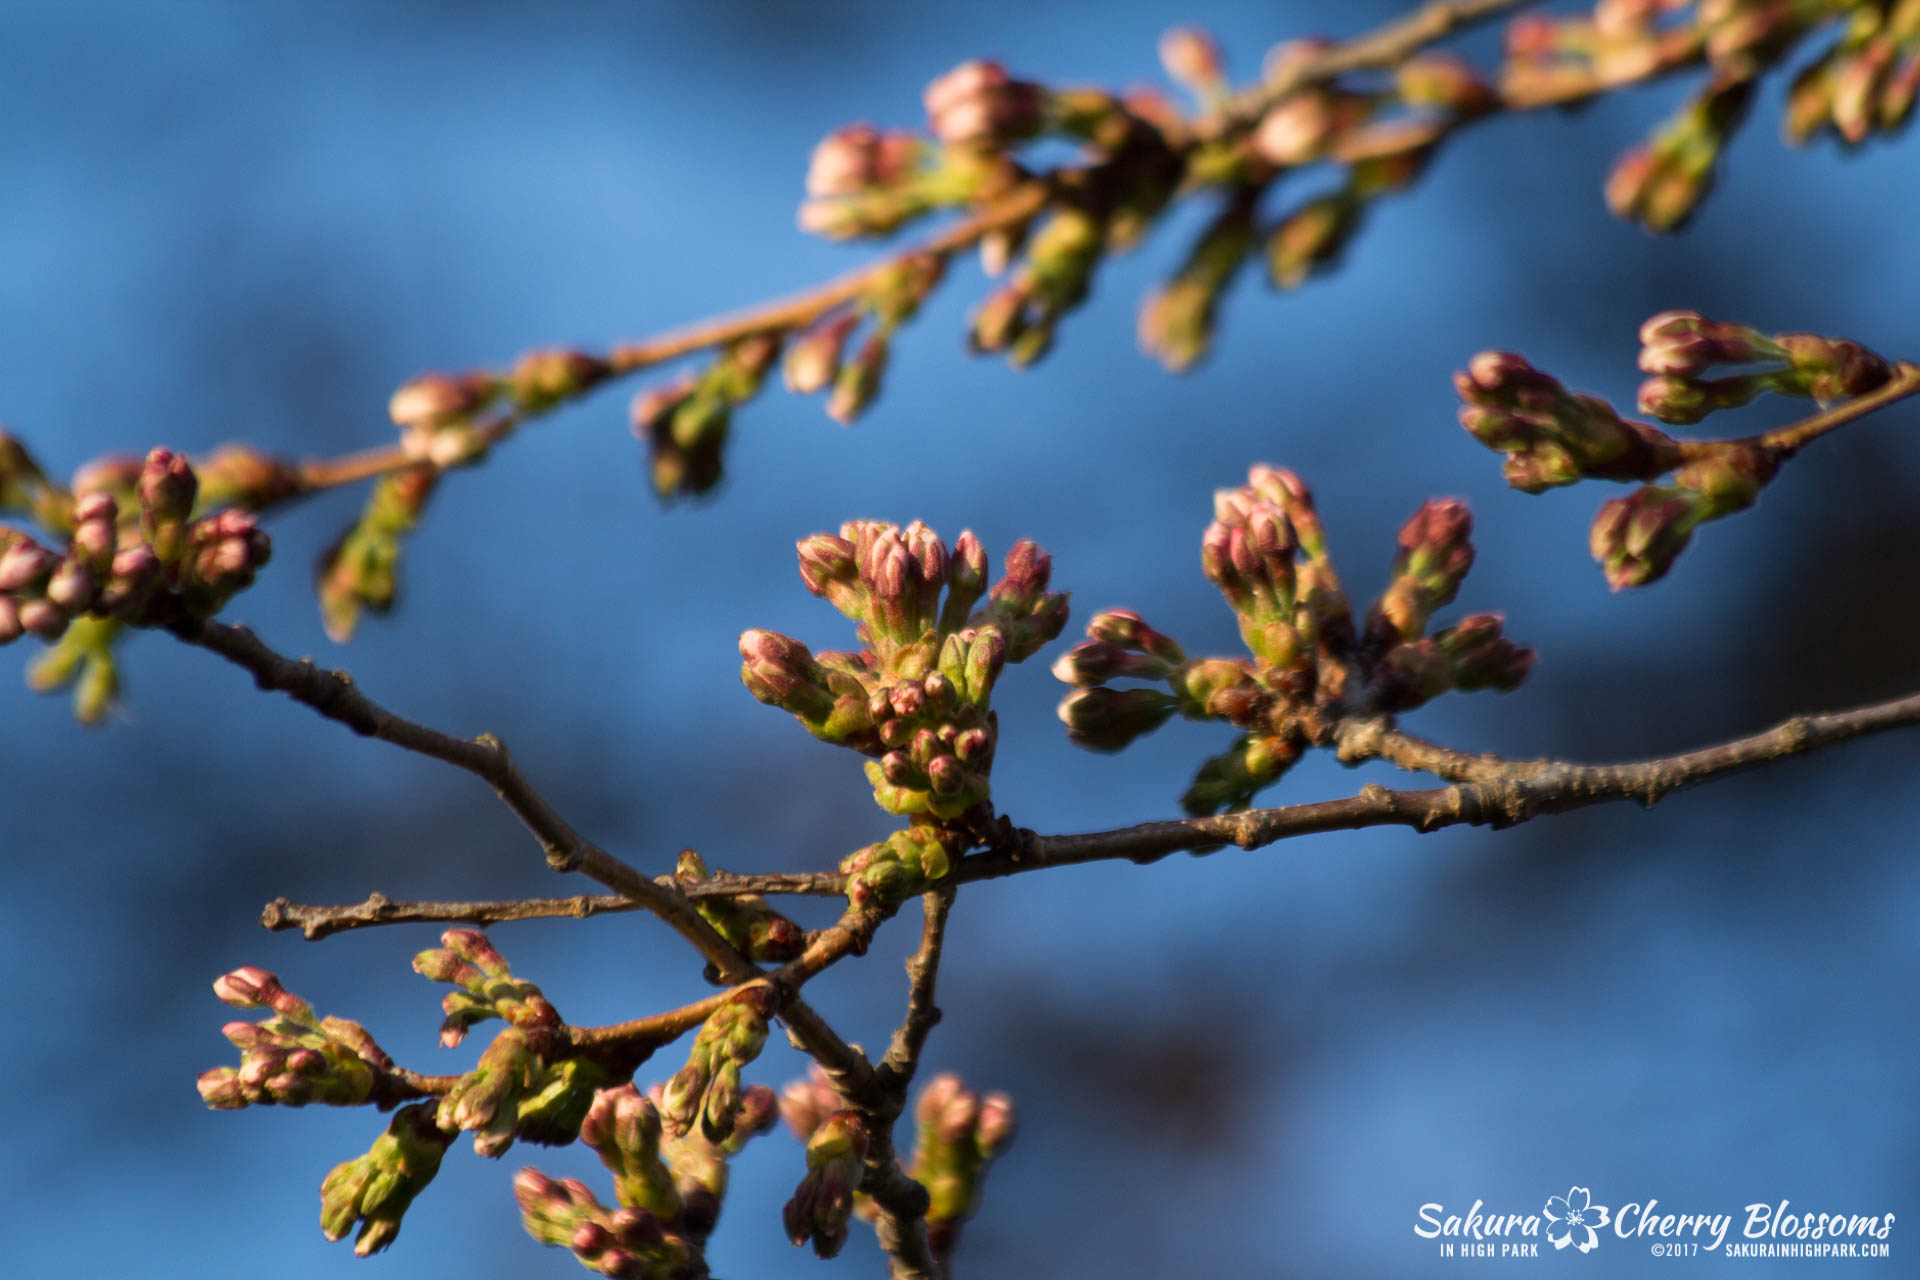 Sakura-in-High-Park-April-17-2017-florets-are-emerging-from-the-buds-throughout-the-park-76.jpg